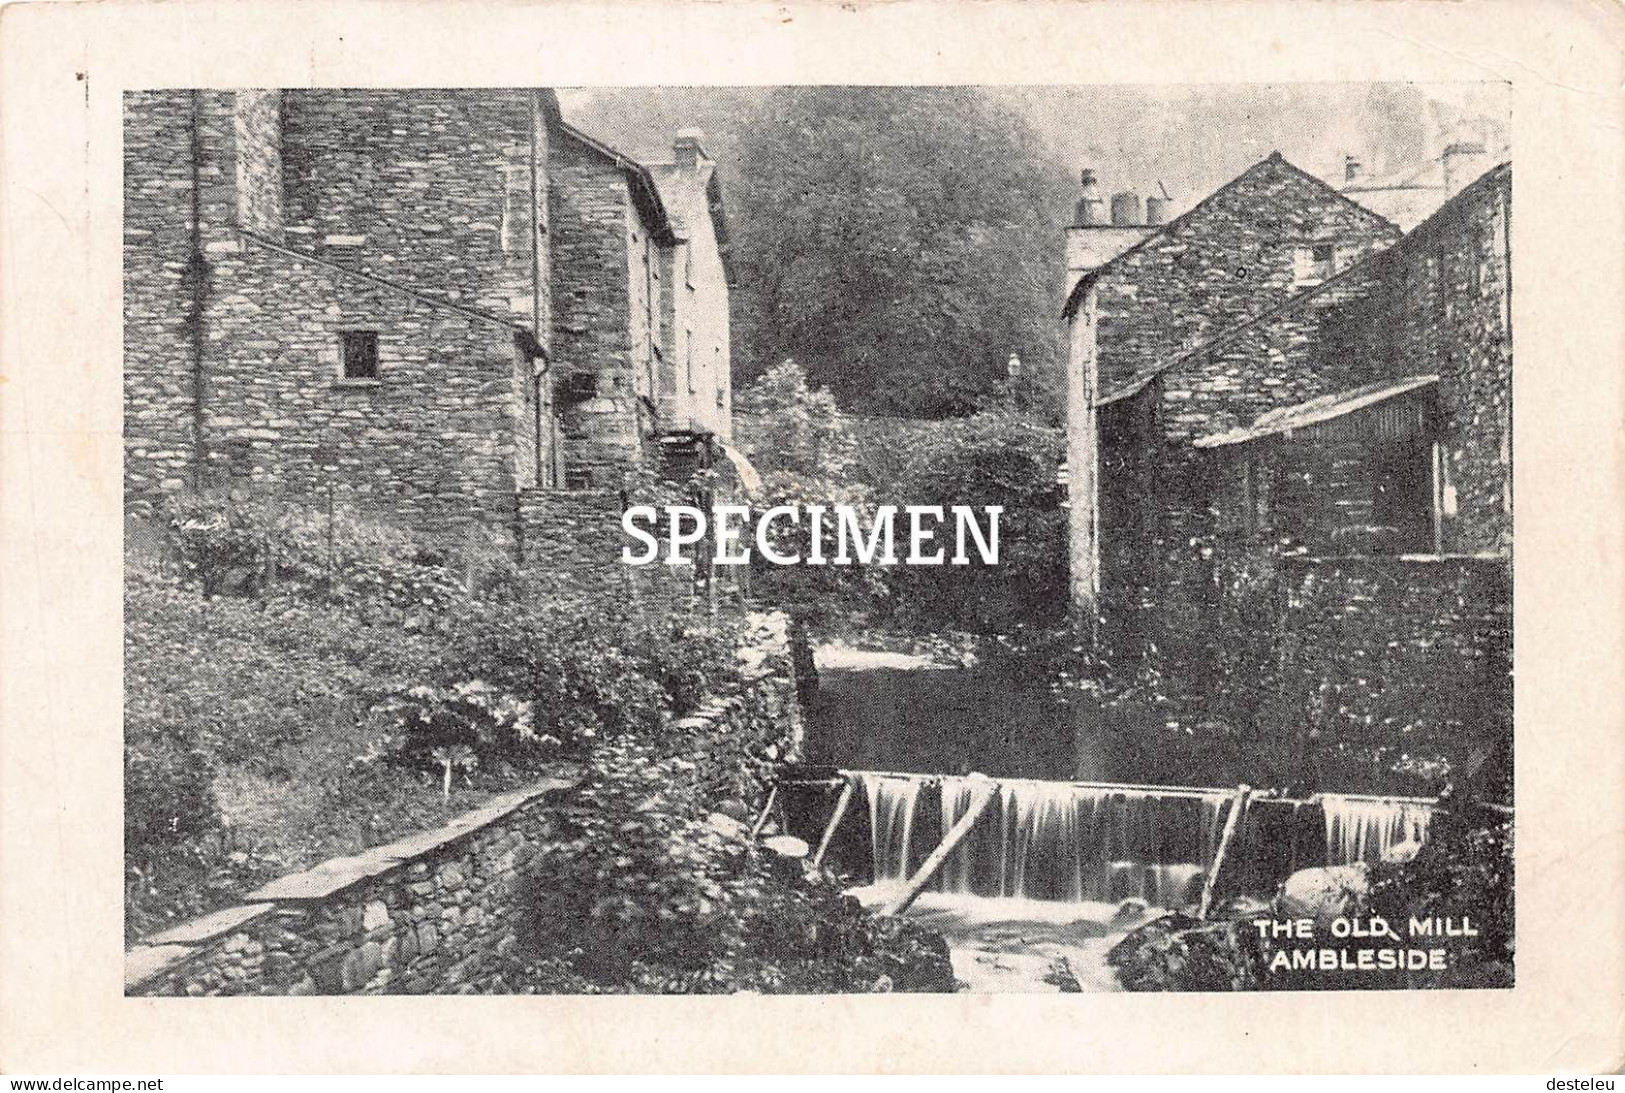 The Old Mill - Ambleside - Ambleside